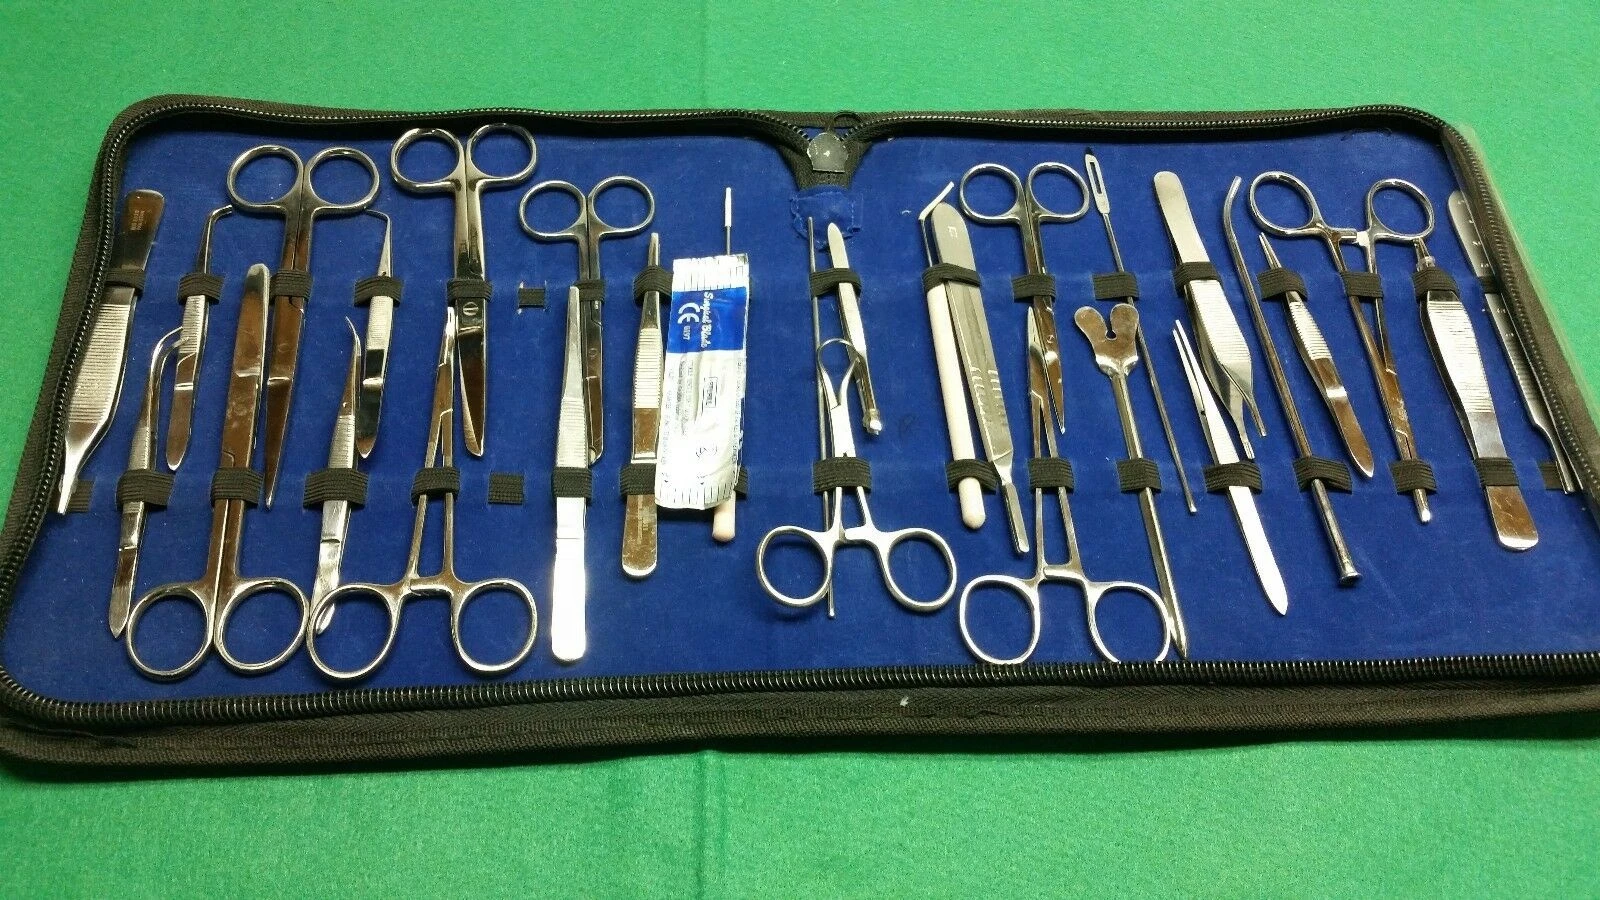 MILITARY FIELD MINOR SURGERY SURGICAL INSTRUMENTS FORCEPS SCISSORS KIT 71 Medical student Dissection Kit By Dental Point